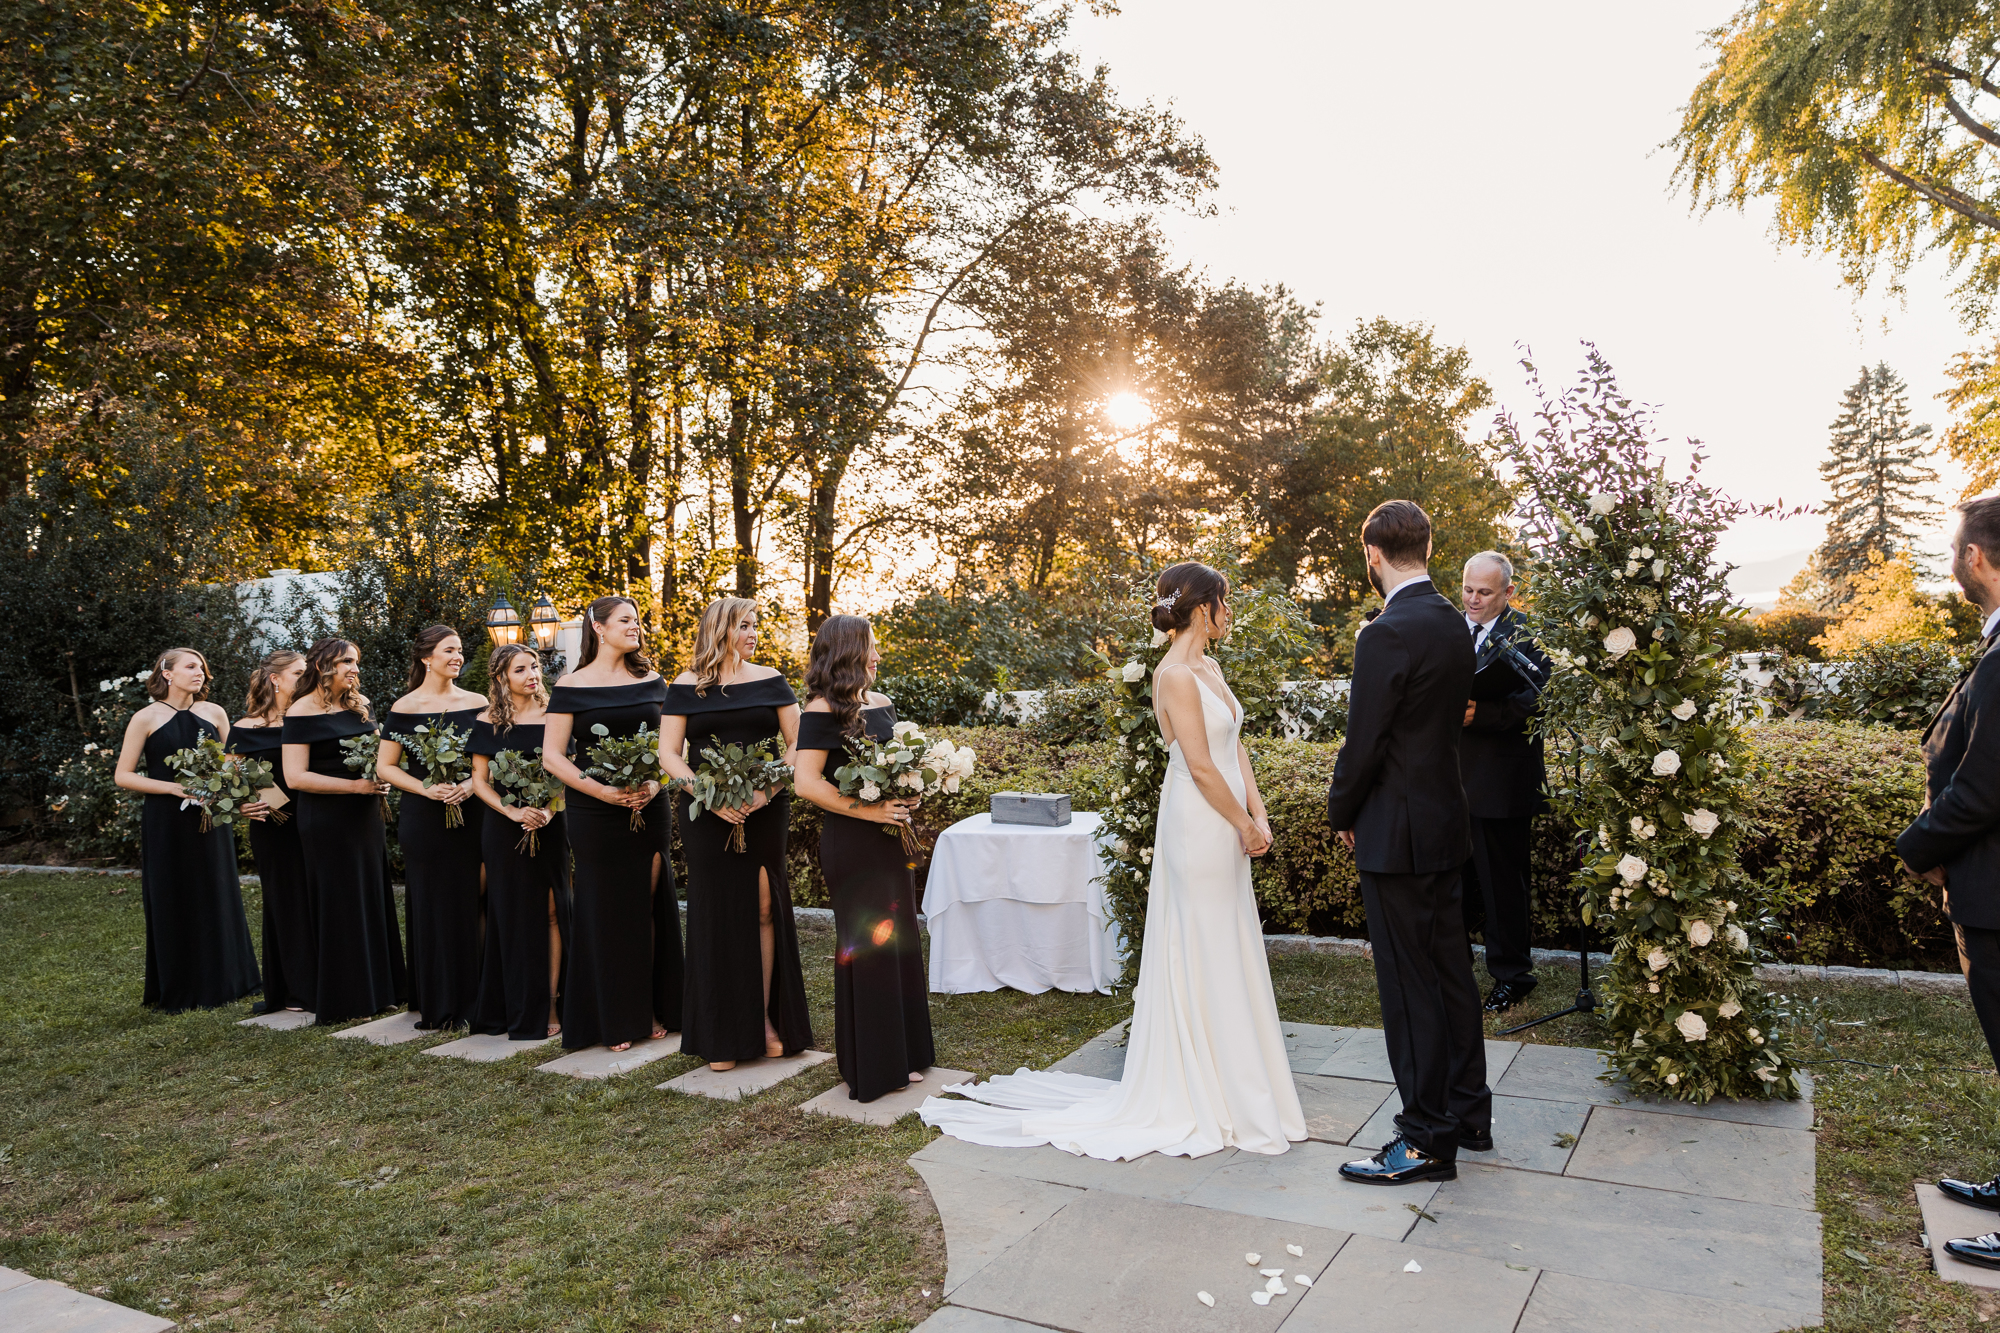 Spectacular Sunset Briarcliff Manor Wedding Photos in Autumn in Hudson Valley